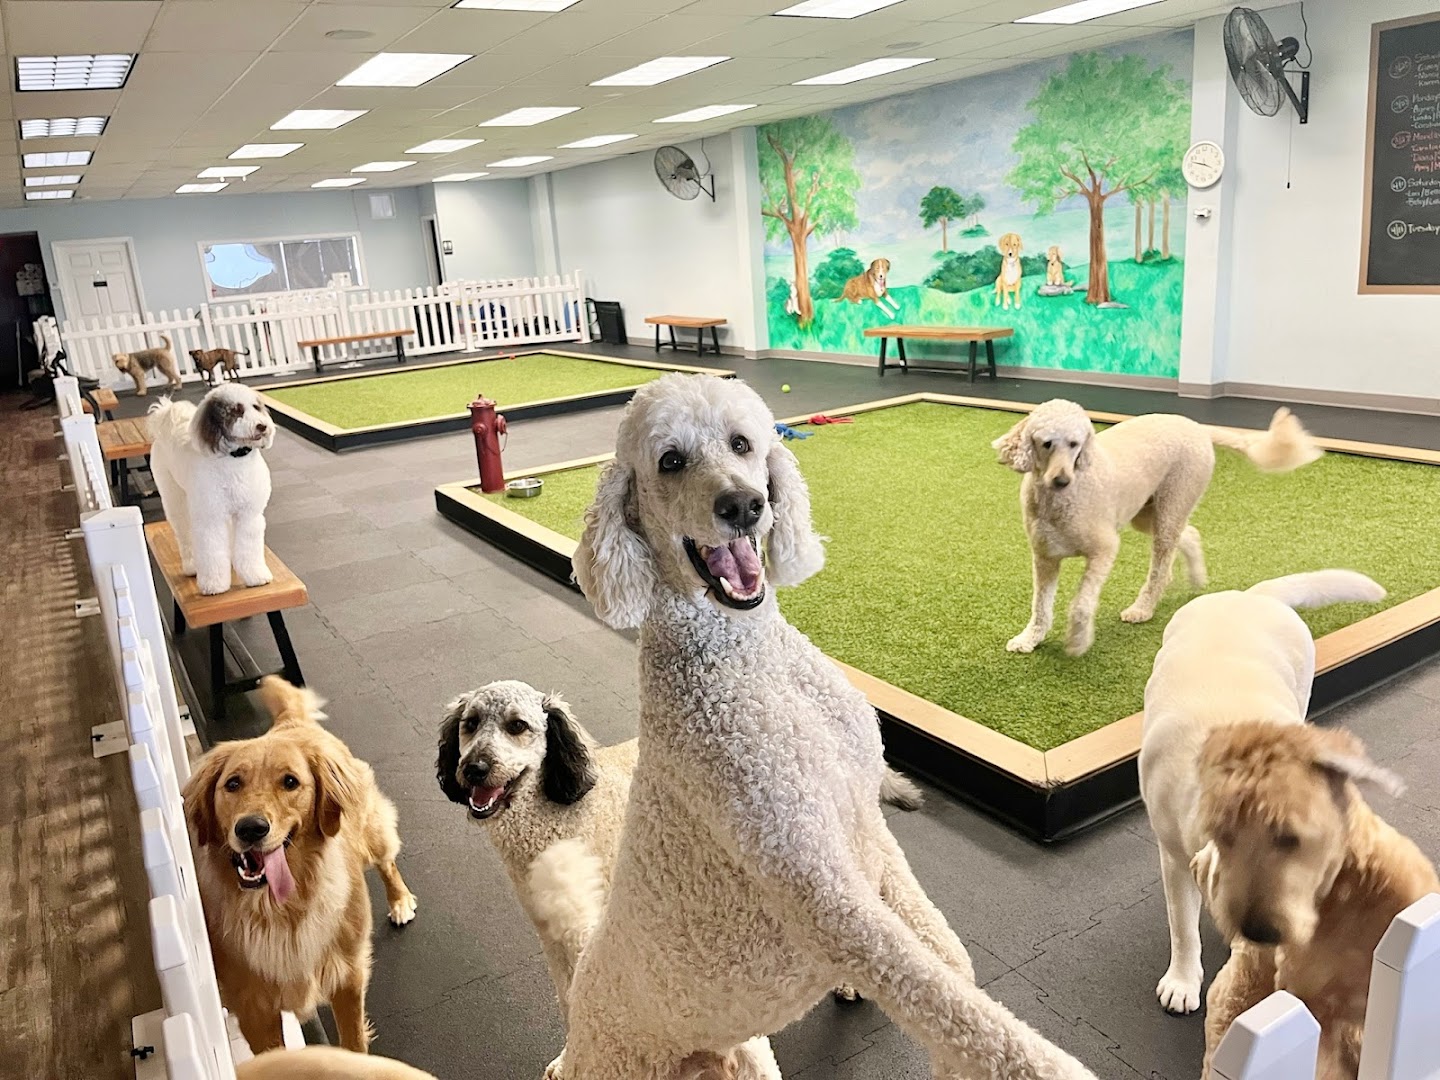 PawSessions Dog Training, Socialization and Event Center of Long Island